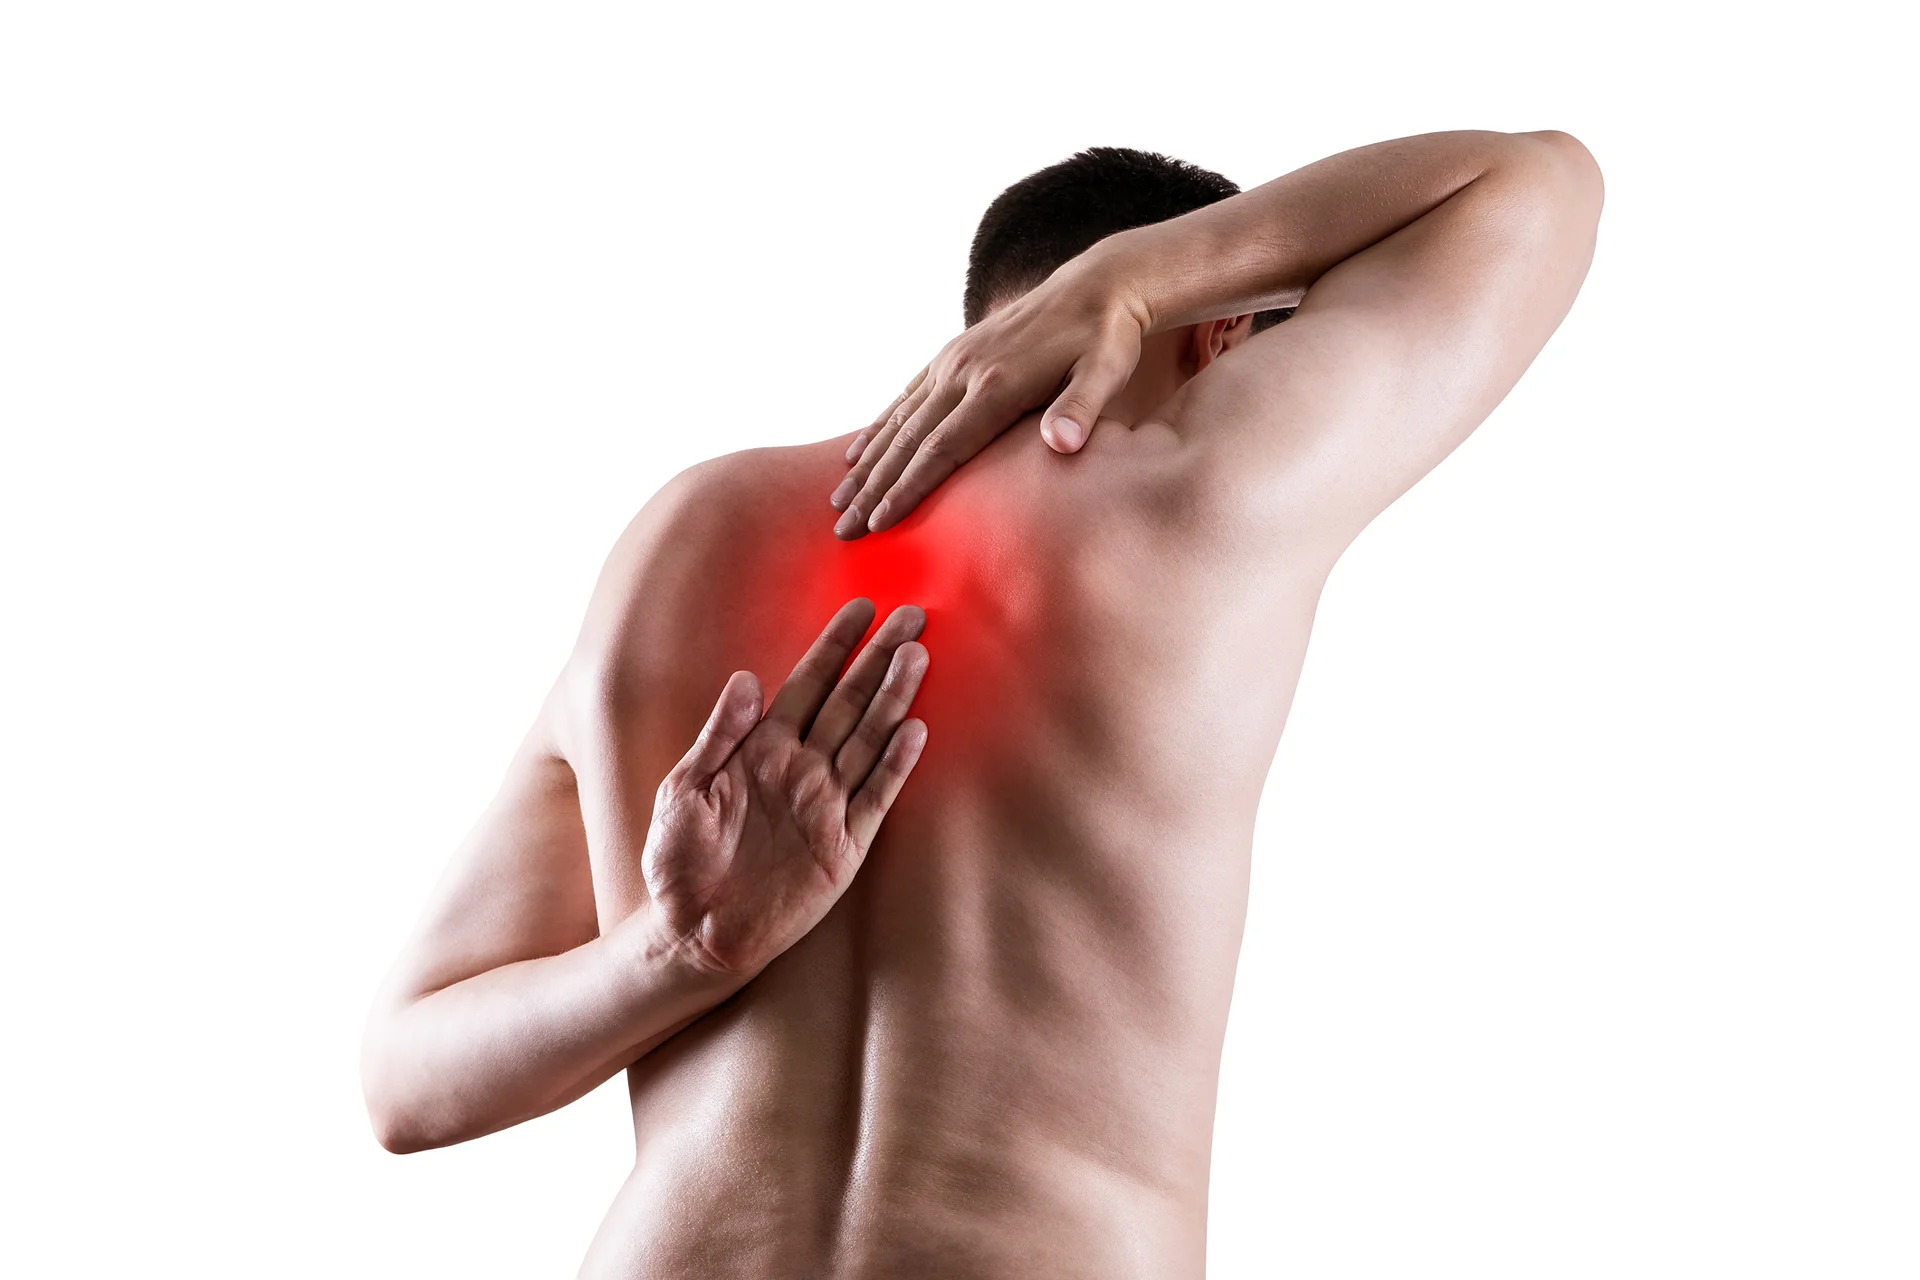 What Causes Burning Back Pain? - NJ's Top Orthopedic Spine & Pain